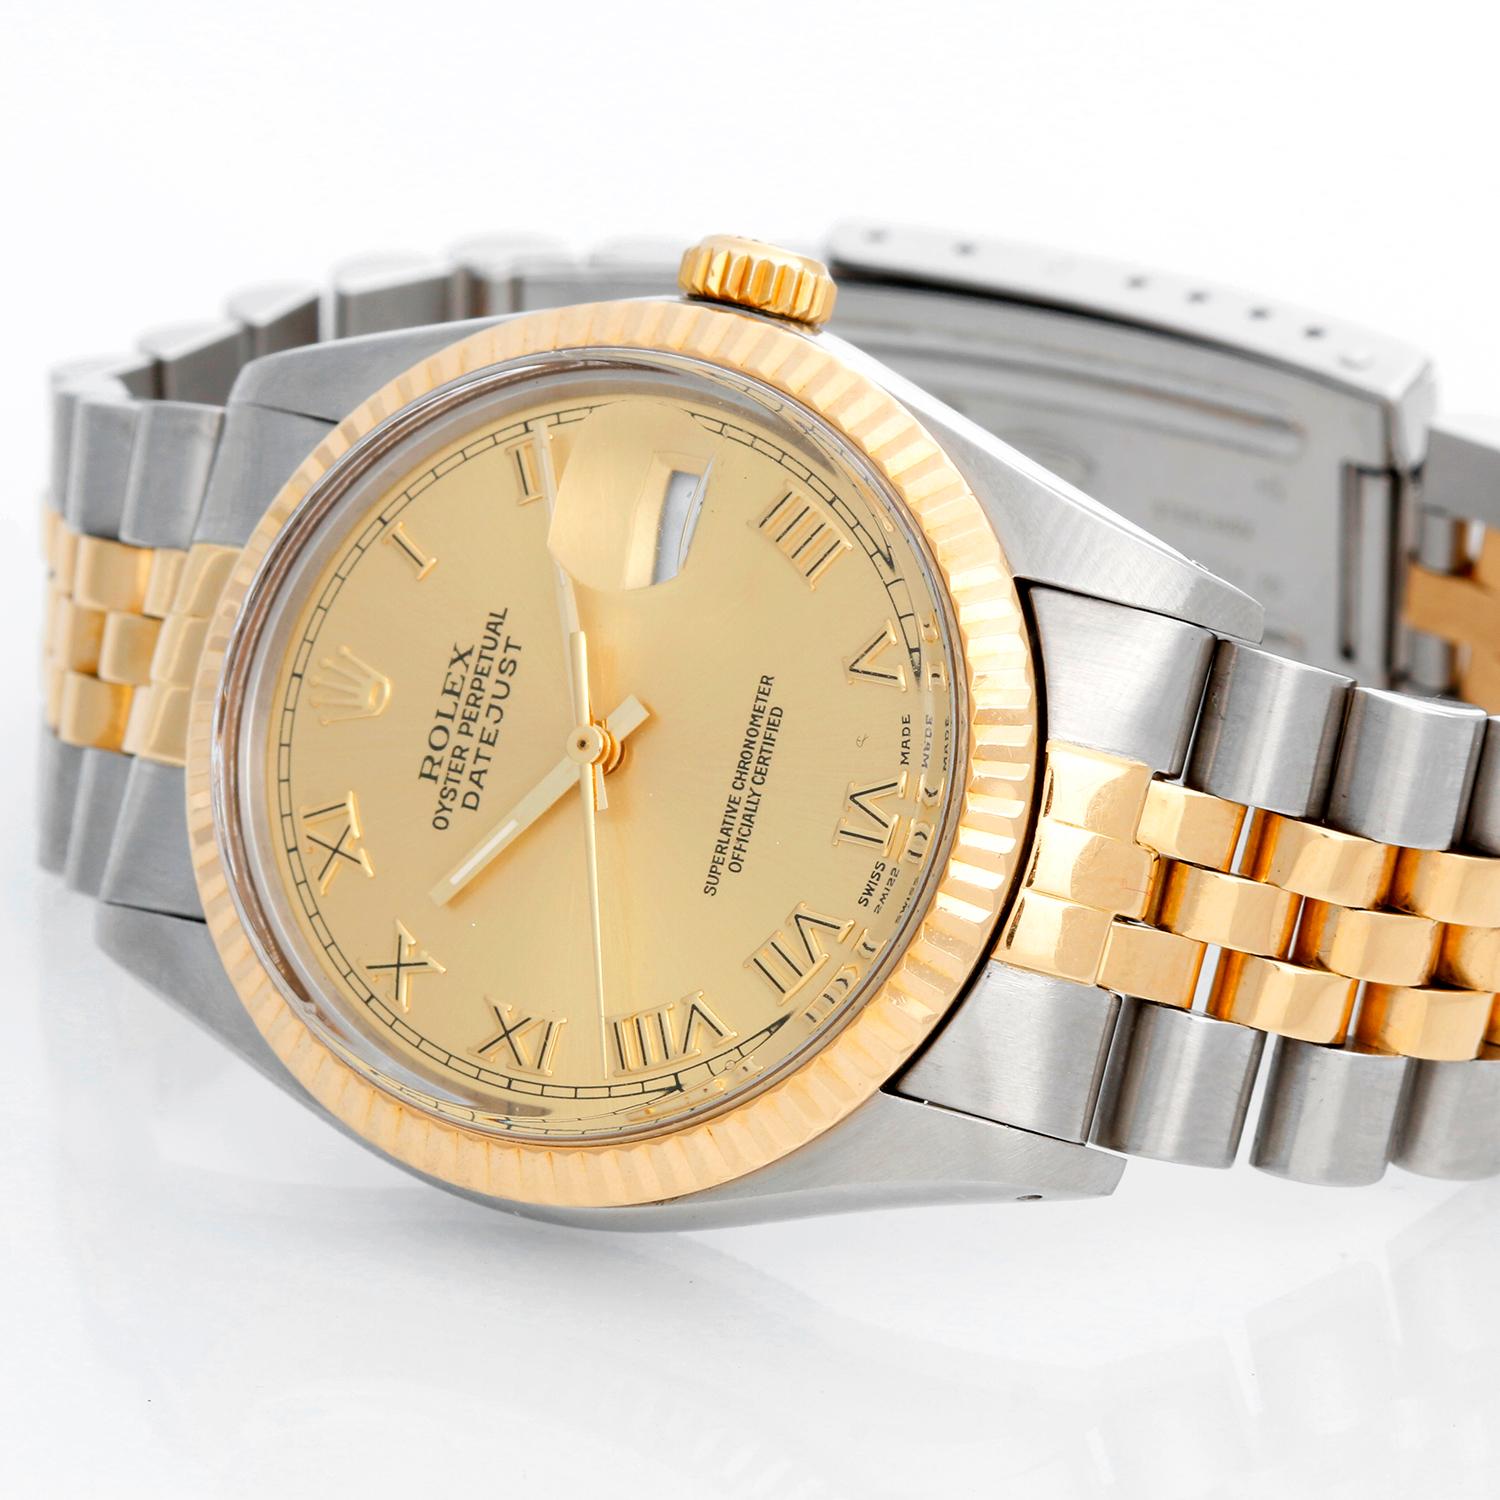 Men's Rolex Datejust 2-Tone Watch 16103 - Automatic winding, 27 jewels, Quickset, acrylic crystal. Stainless steel case with fluted  bezel ( 36 mm ). Champagne dial with Roman numerals . Stainless steel and 18k yellow gold Jubilee bracelet.